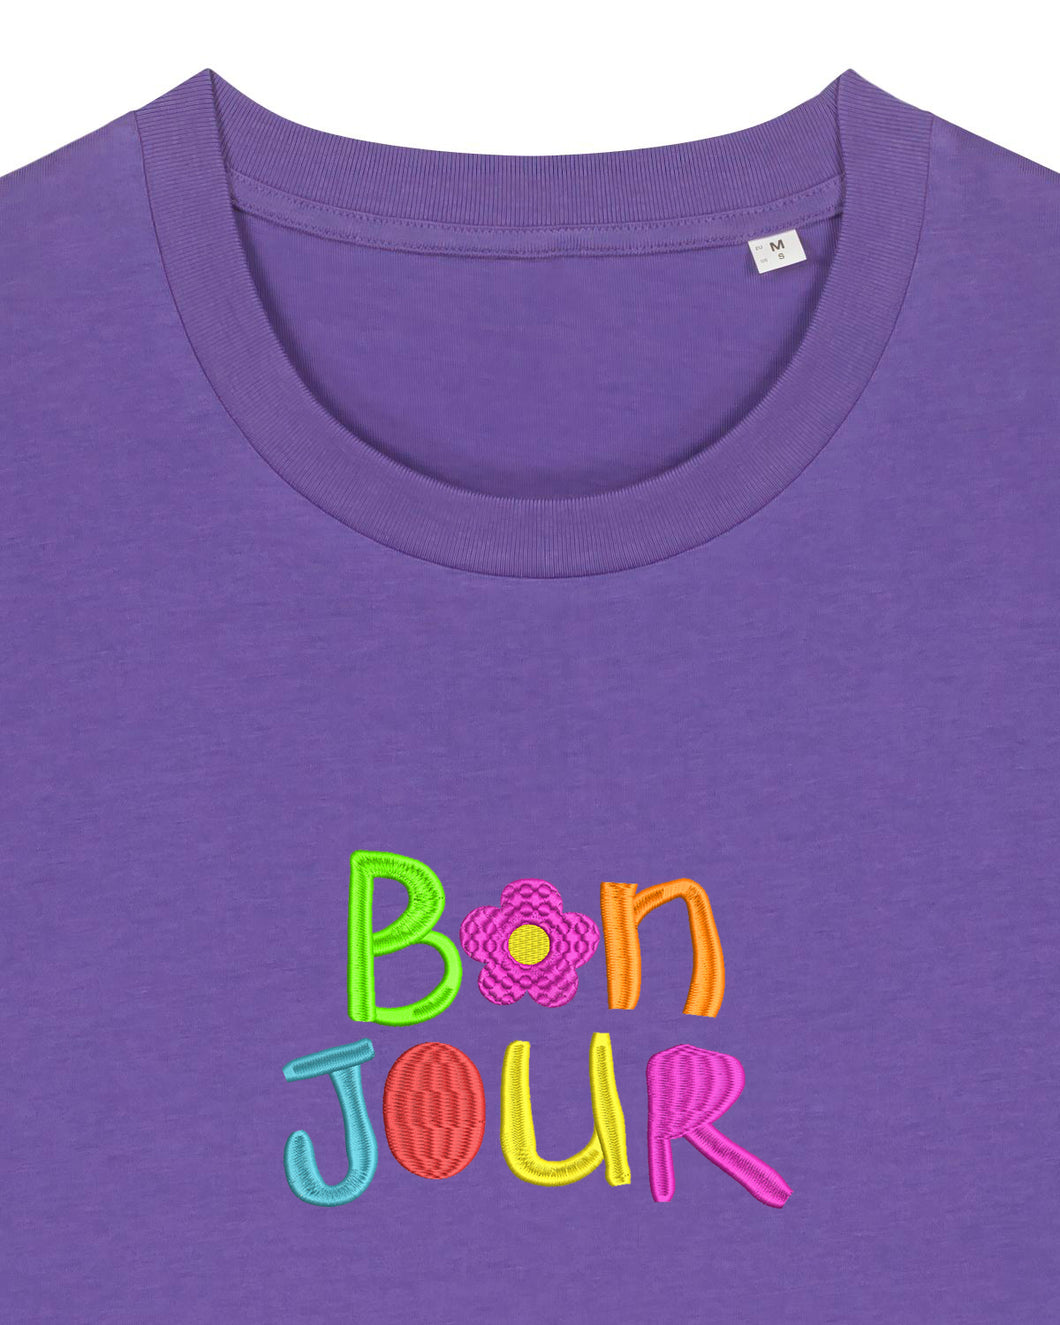 B🌸N JOUR - Embroidered WOMEN'S T-SHIRT